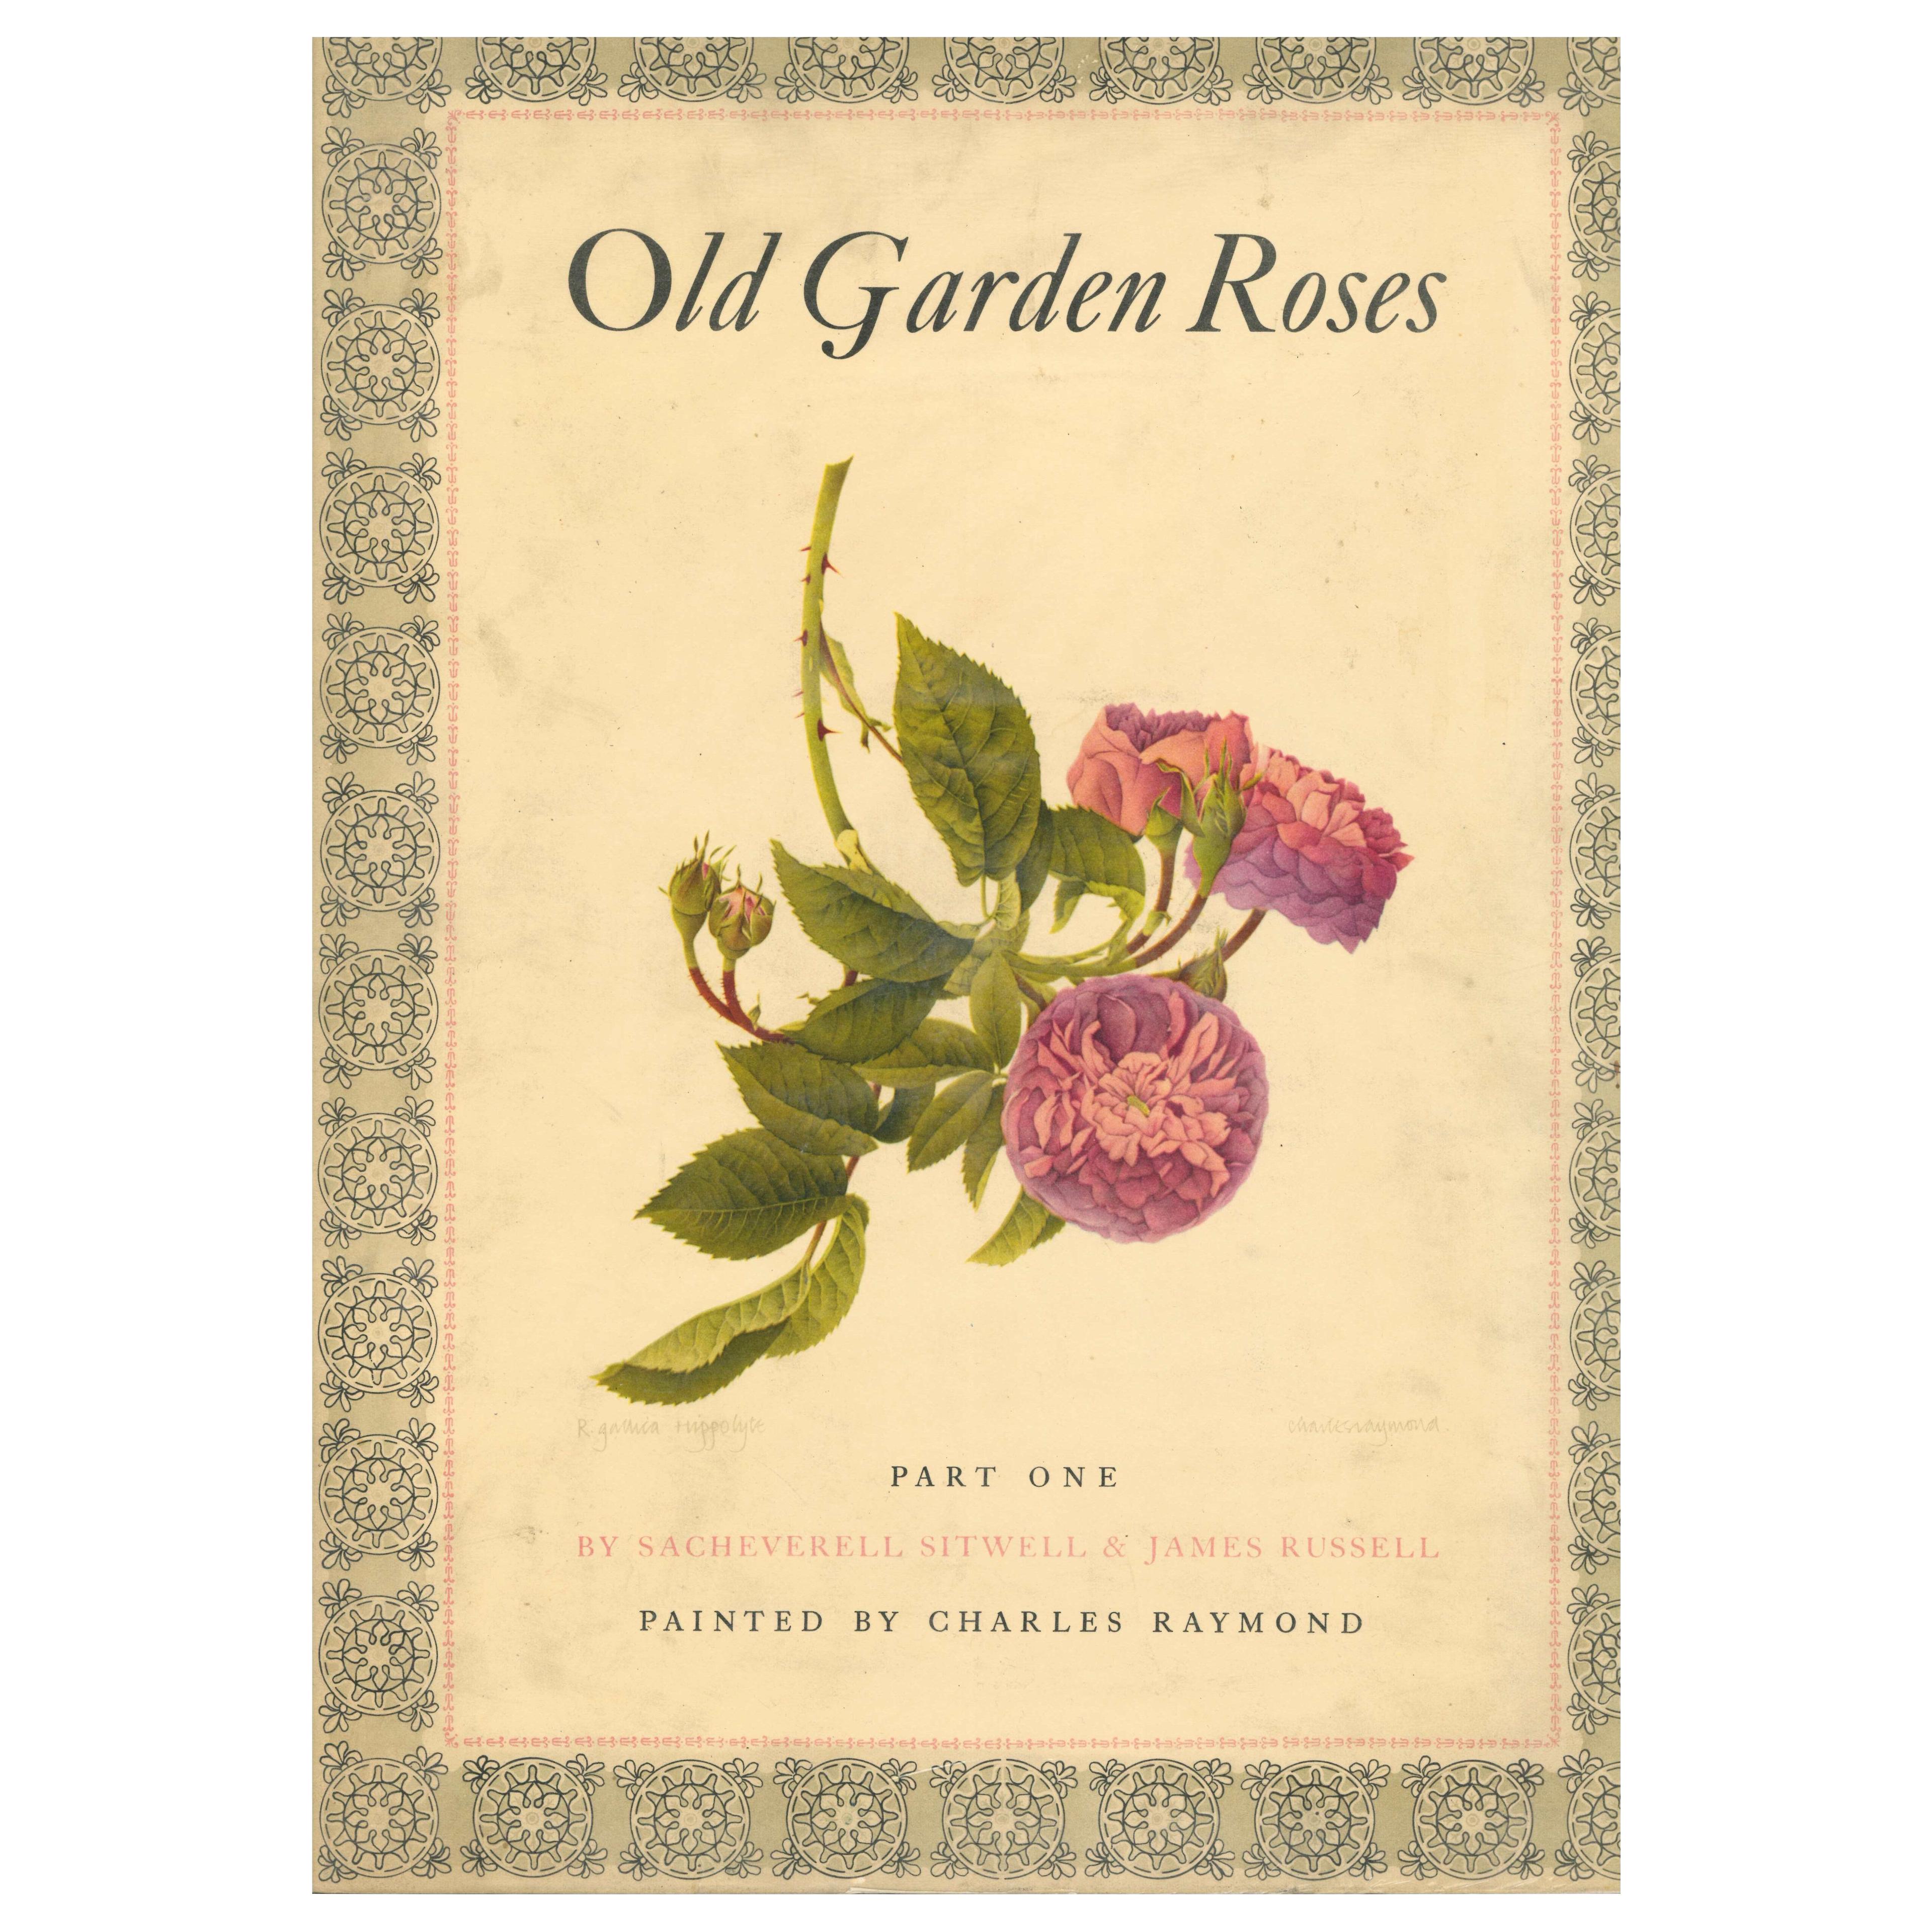 OLD GARDEN ROSES by Sacheverell Sitwell. 2 Books